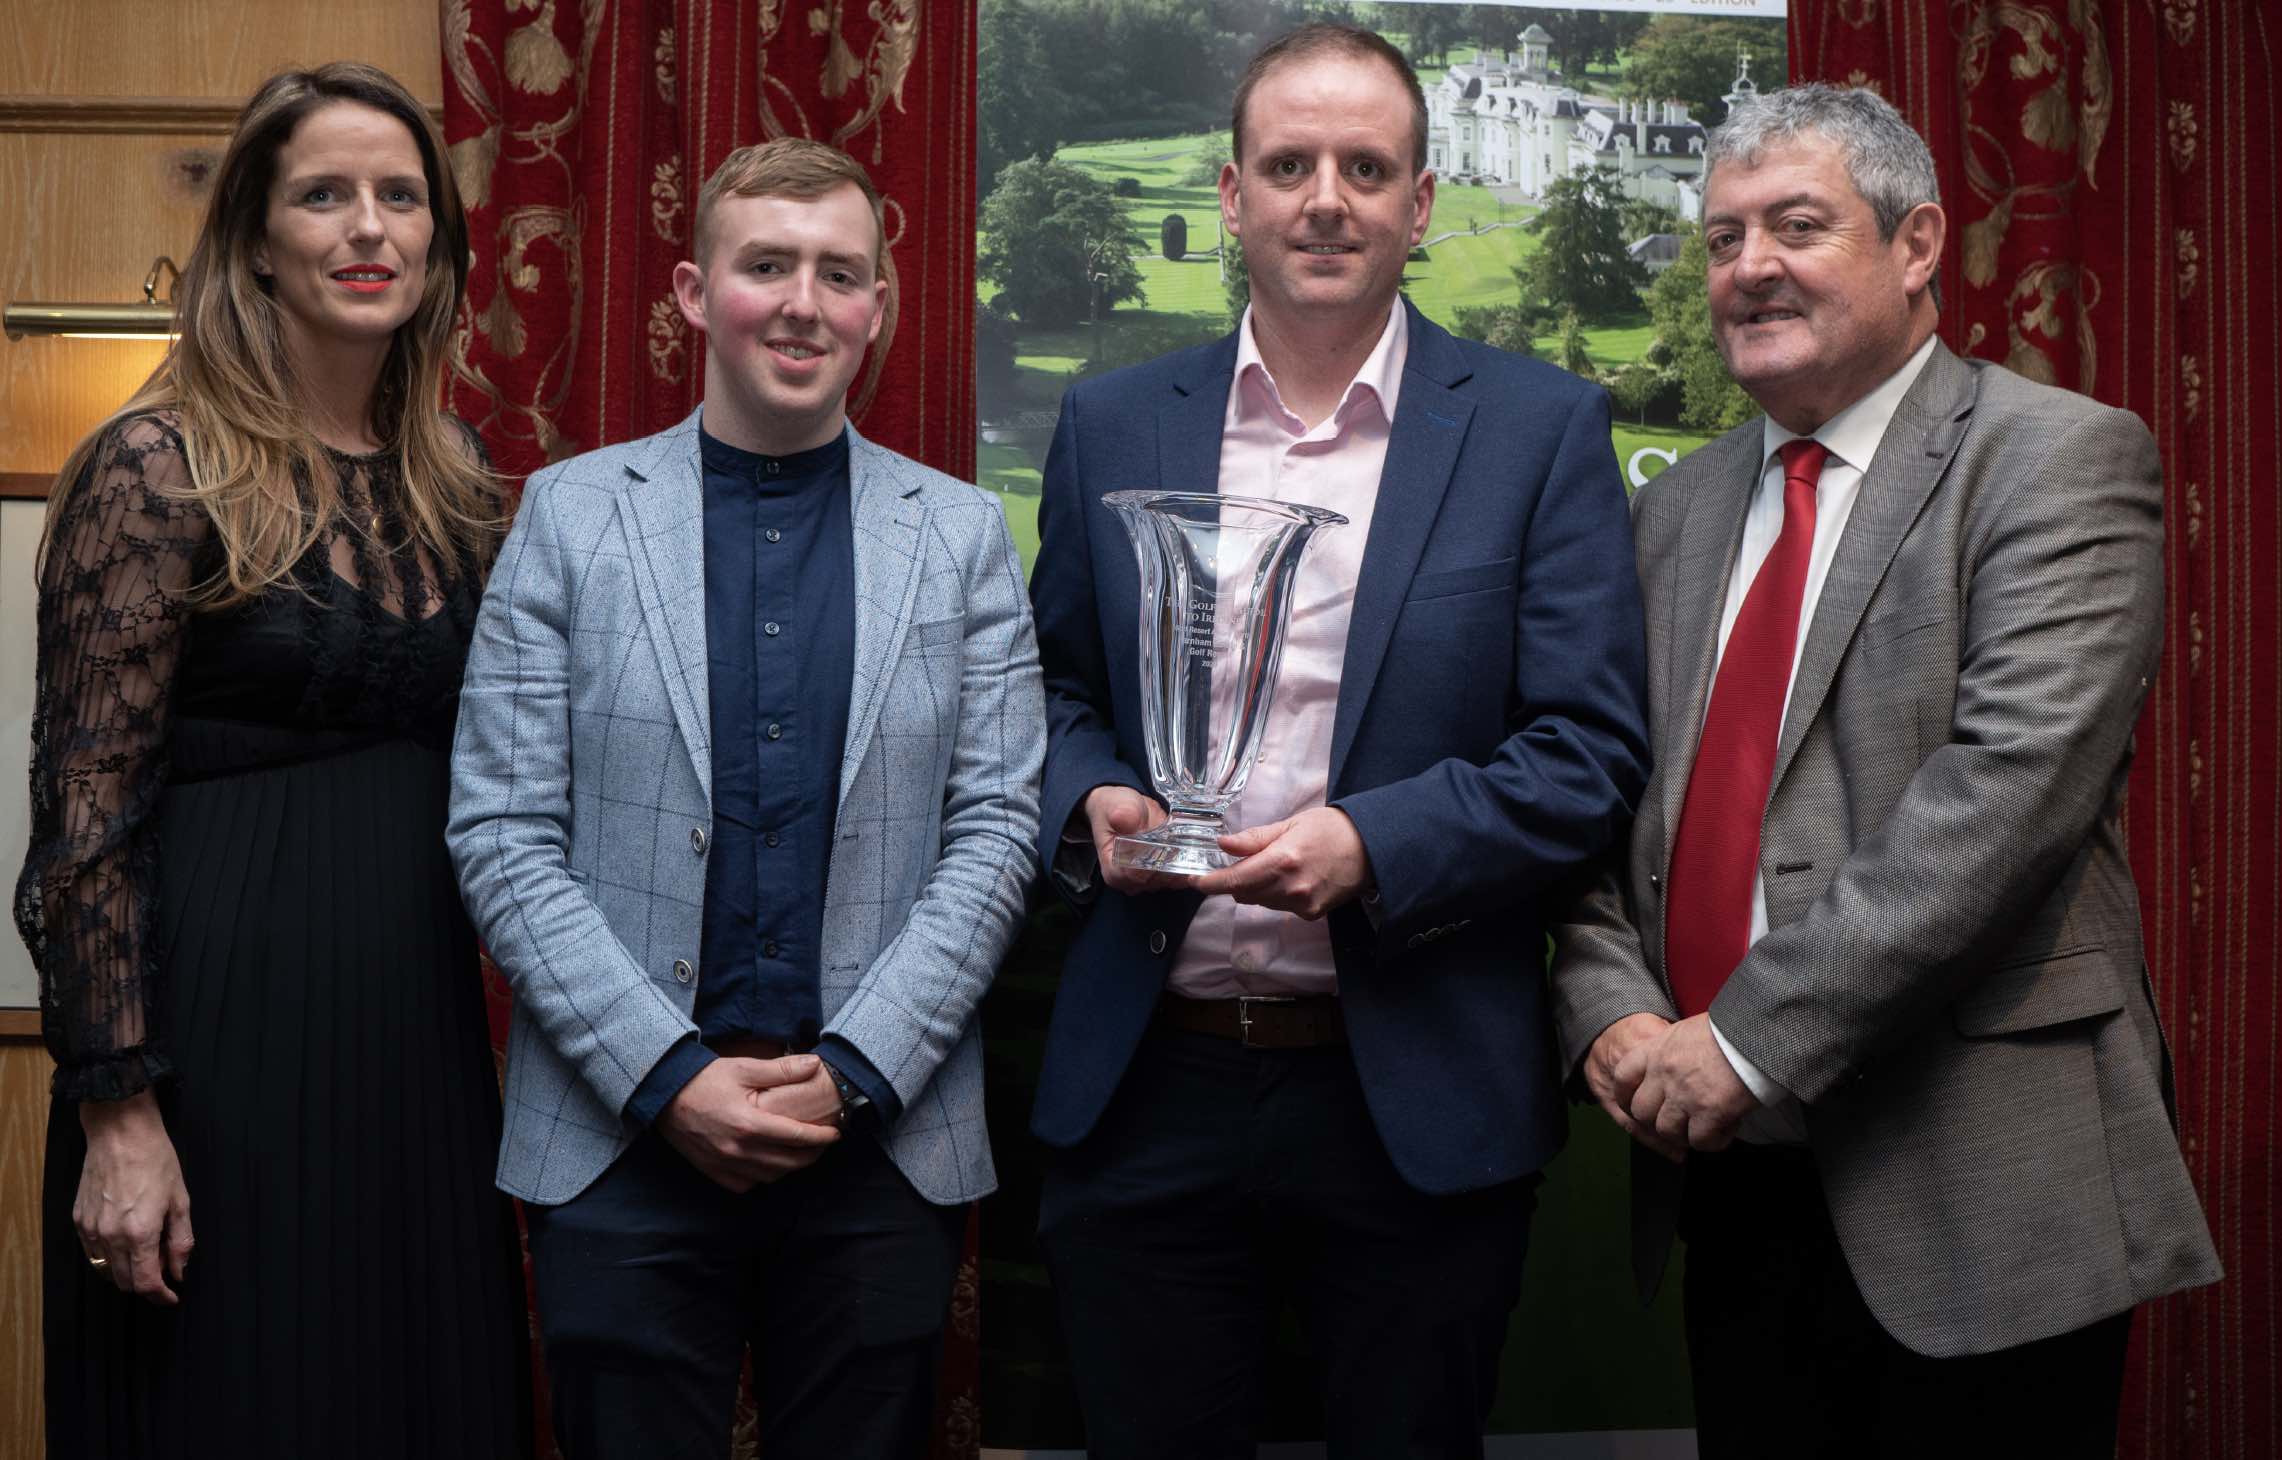 Golfers Guide to Ireland annual Awards announced